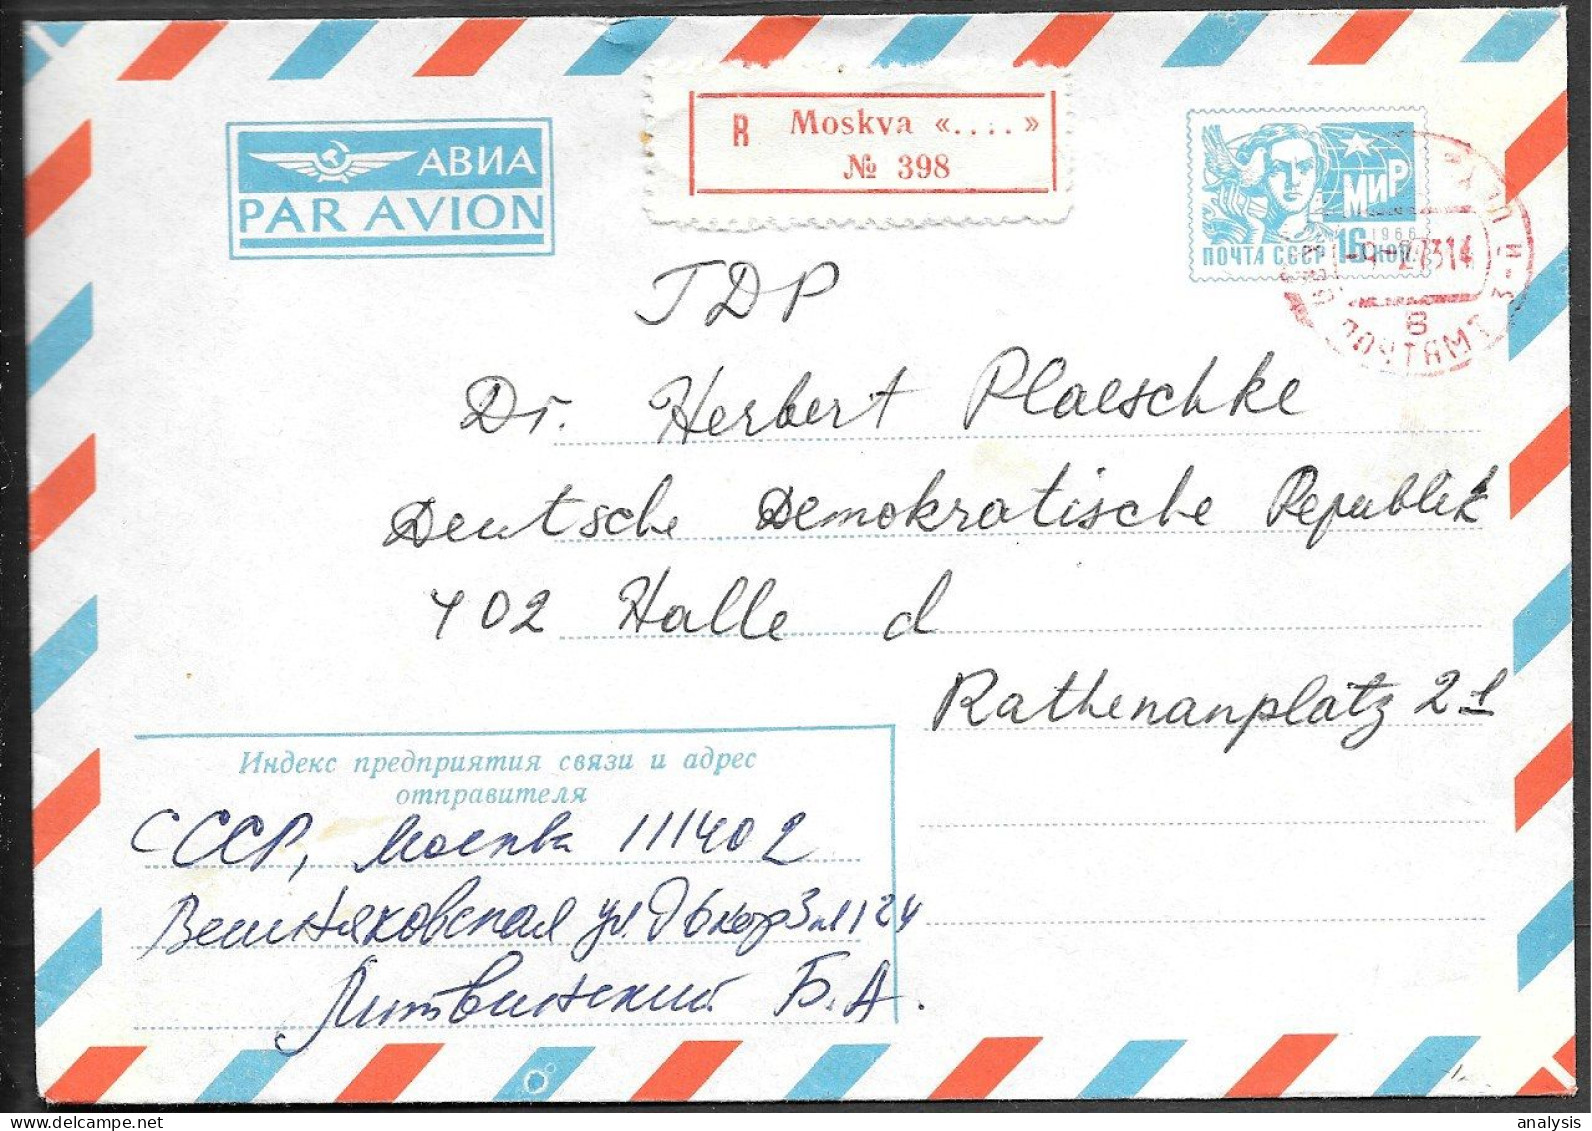 Russia 16K Airmail Registered Postal Stationery Cover Mailed To Germany 1973 - Covers & Documents